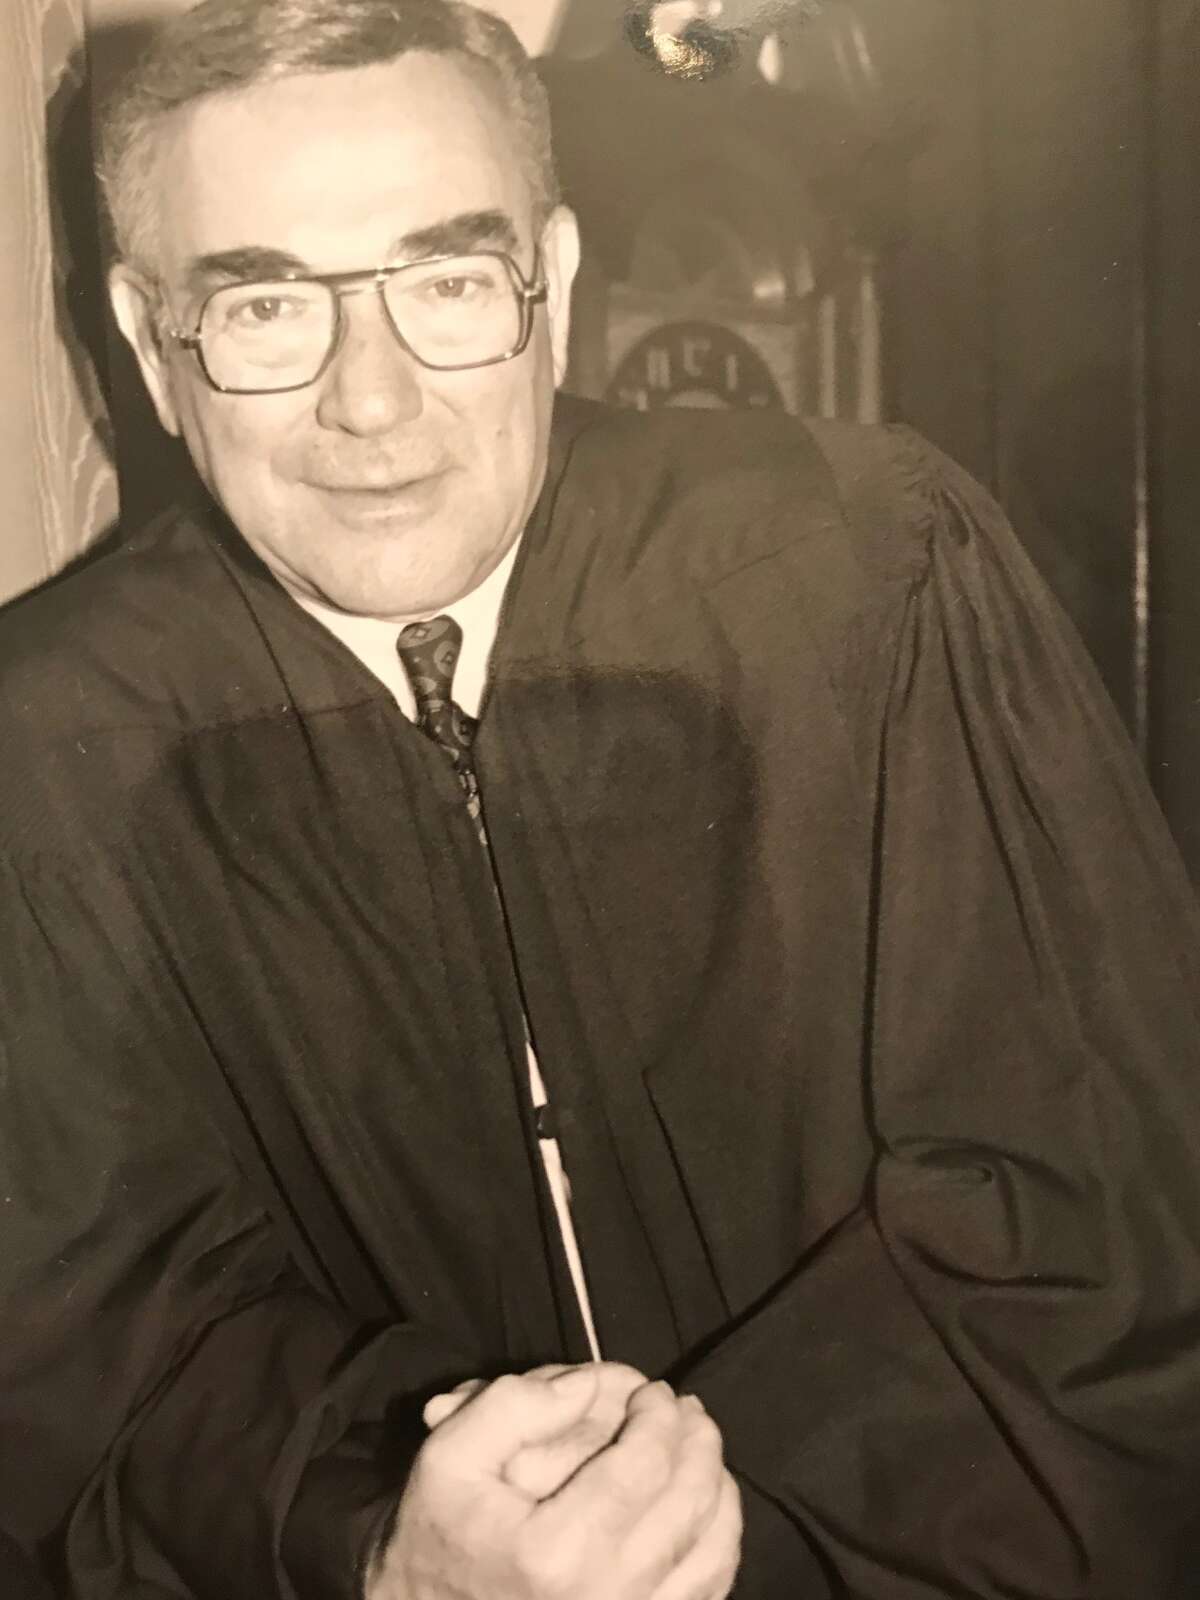 This undated photograph shows Judge Leonard A. Weiss in his judicial robes.